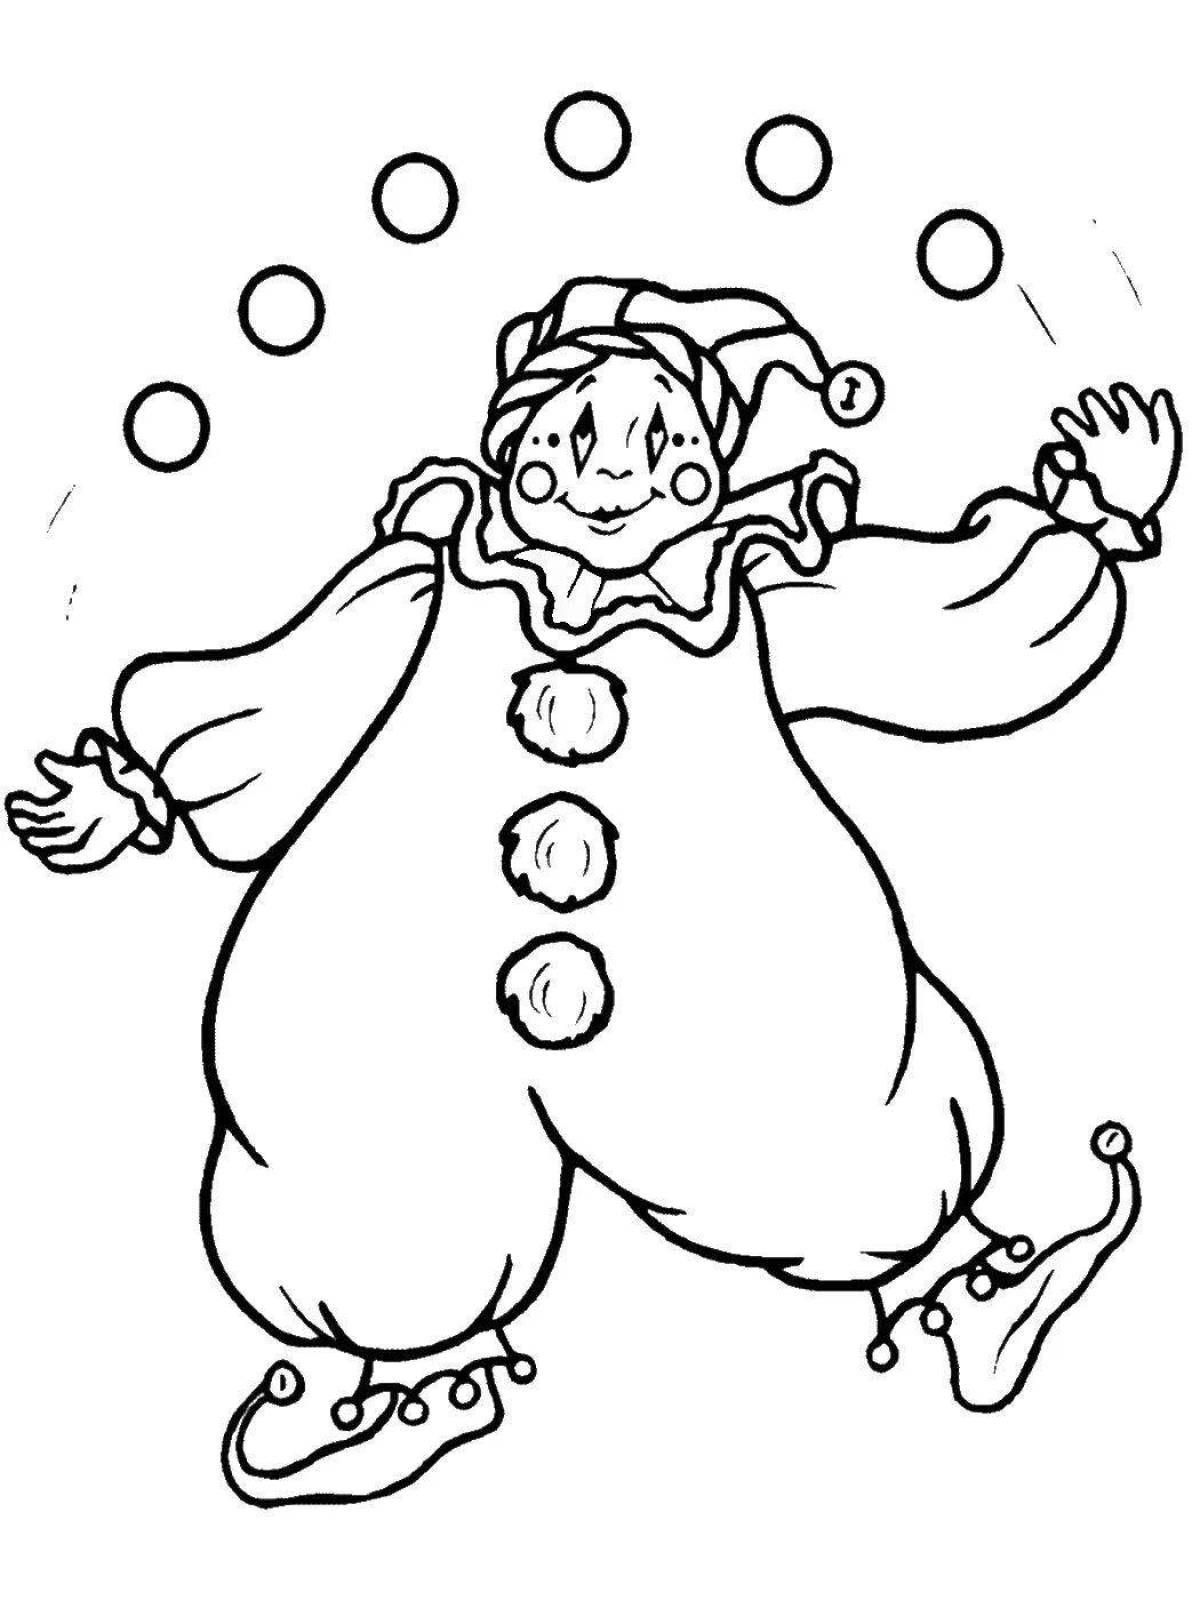 Live jester coloring pages for kids